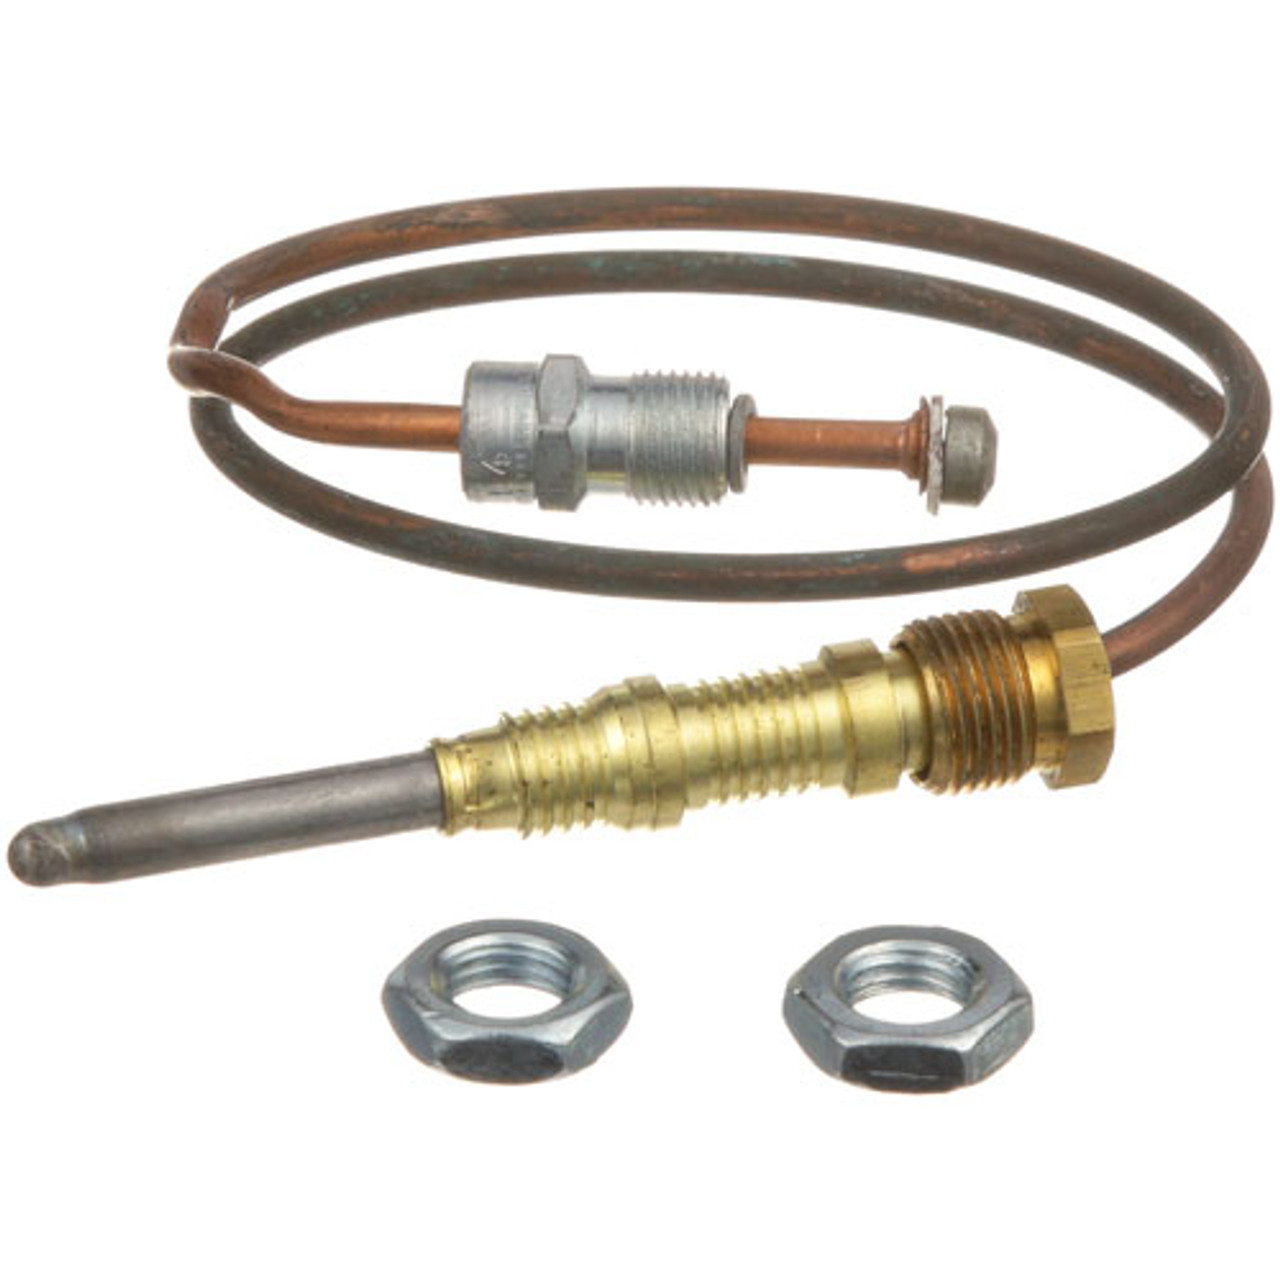 Thermocouple - Replacement Part For Jade Range 460127000